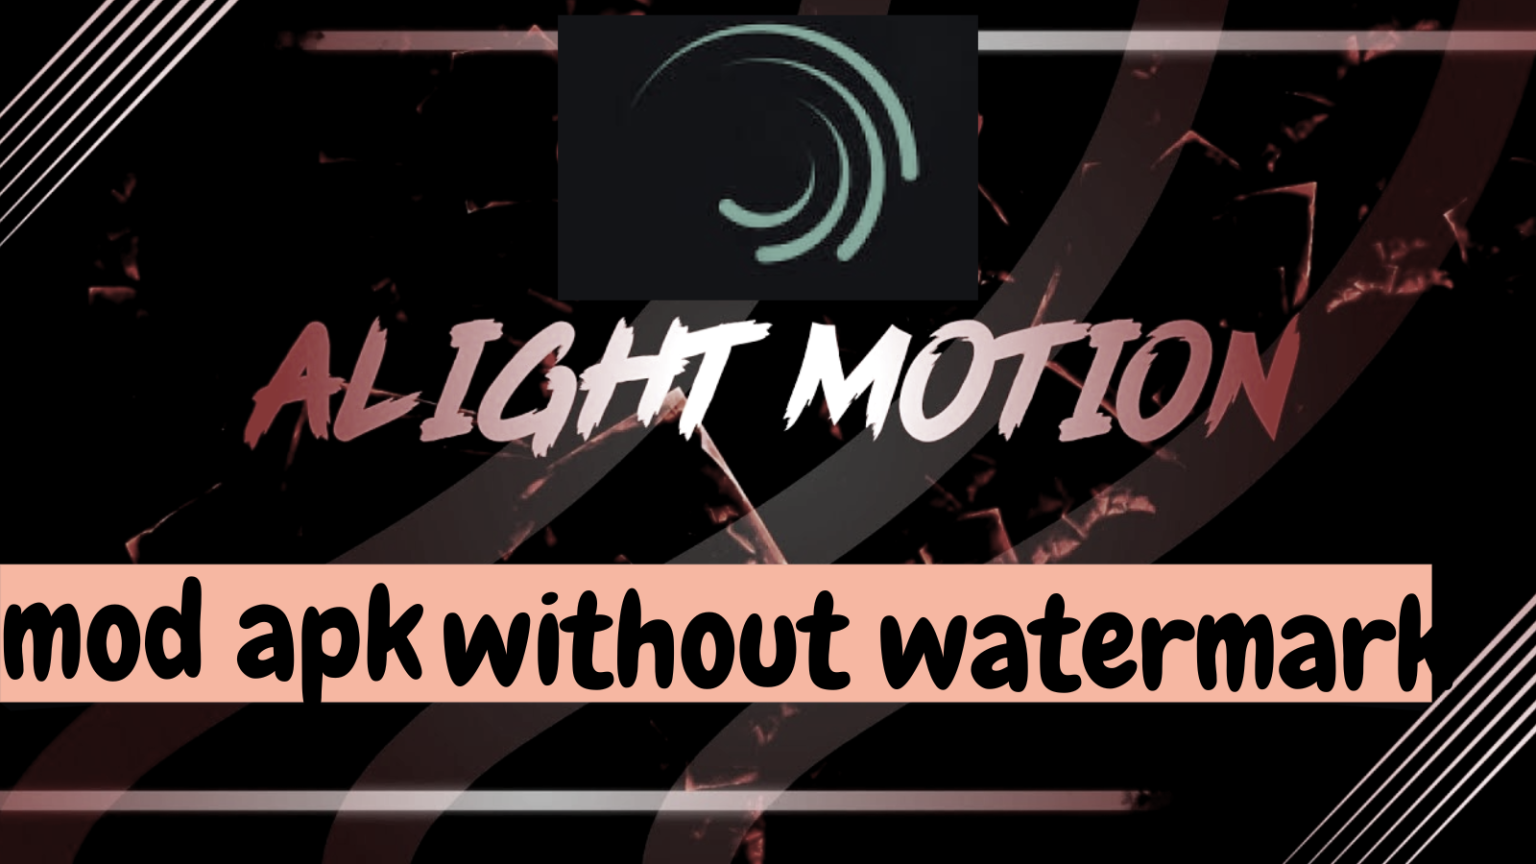 Alight motion mod APK without watermark Download